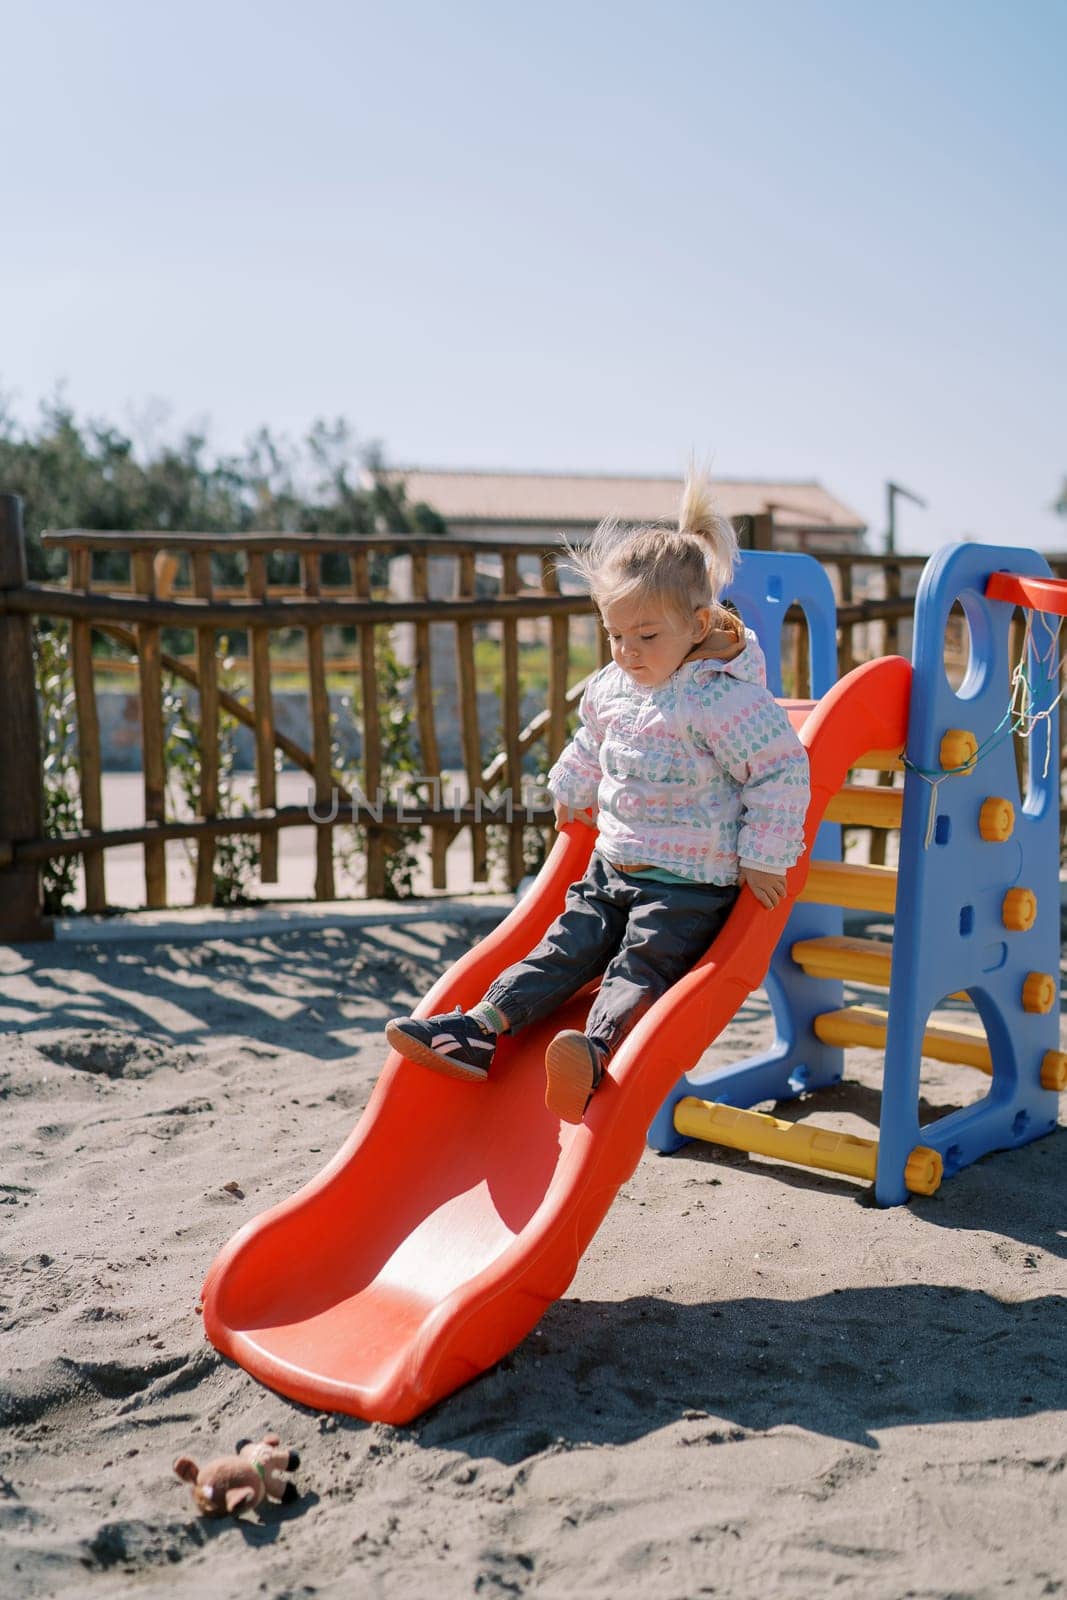 Little girl slides down a slide on the playground holding onto the handrails by Nadtochiy